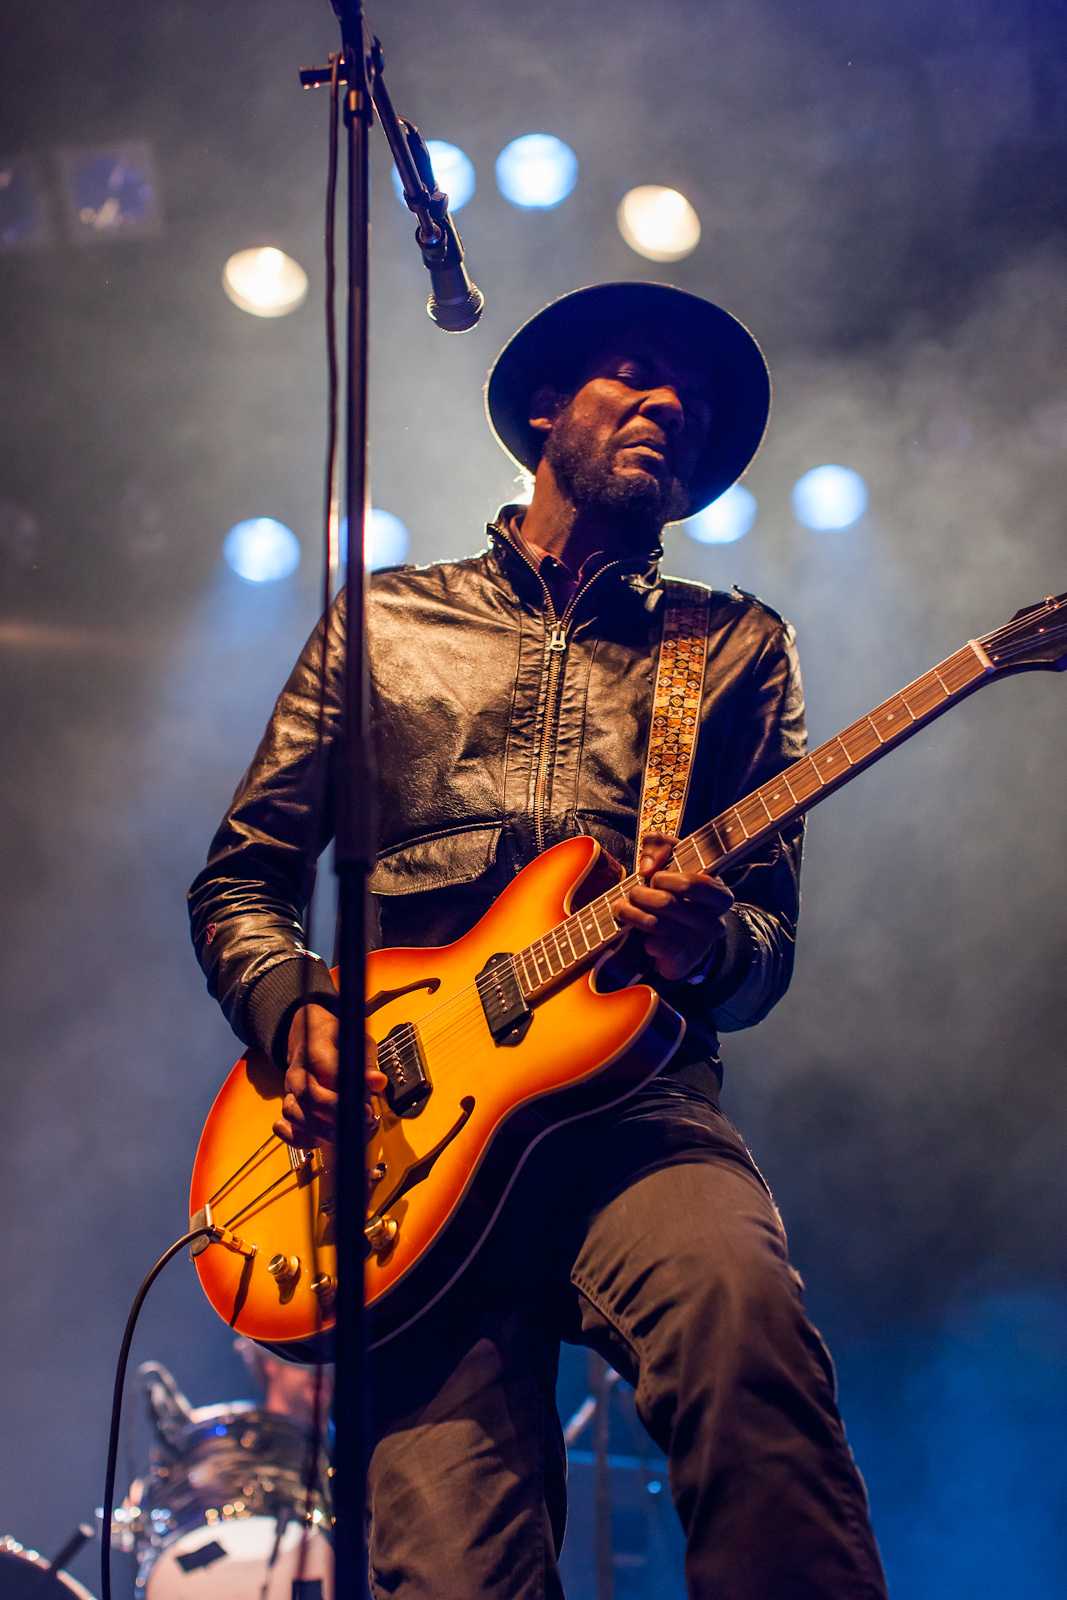 Gary Clark Jr. rocking on in the music since 2010. Photo credit: Creative Commons